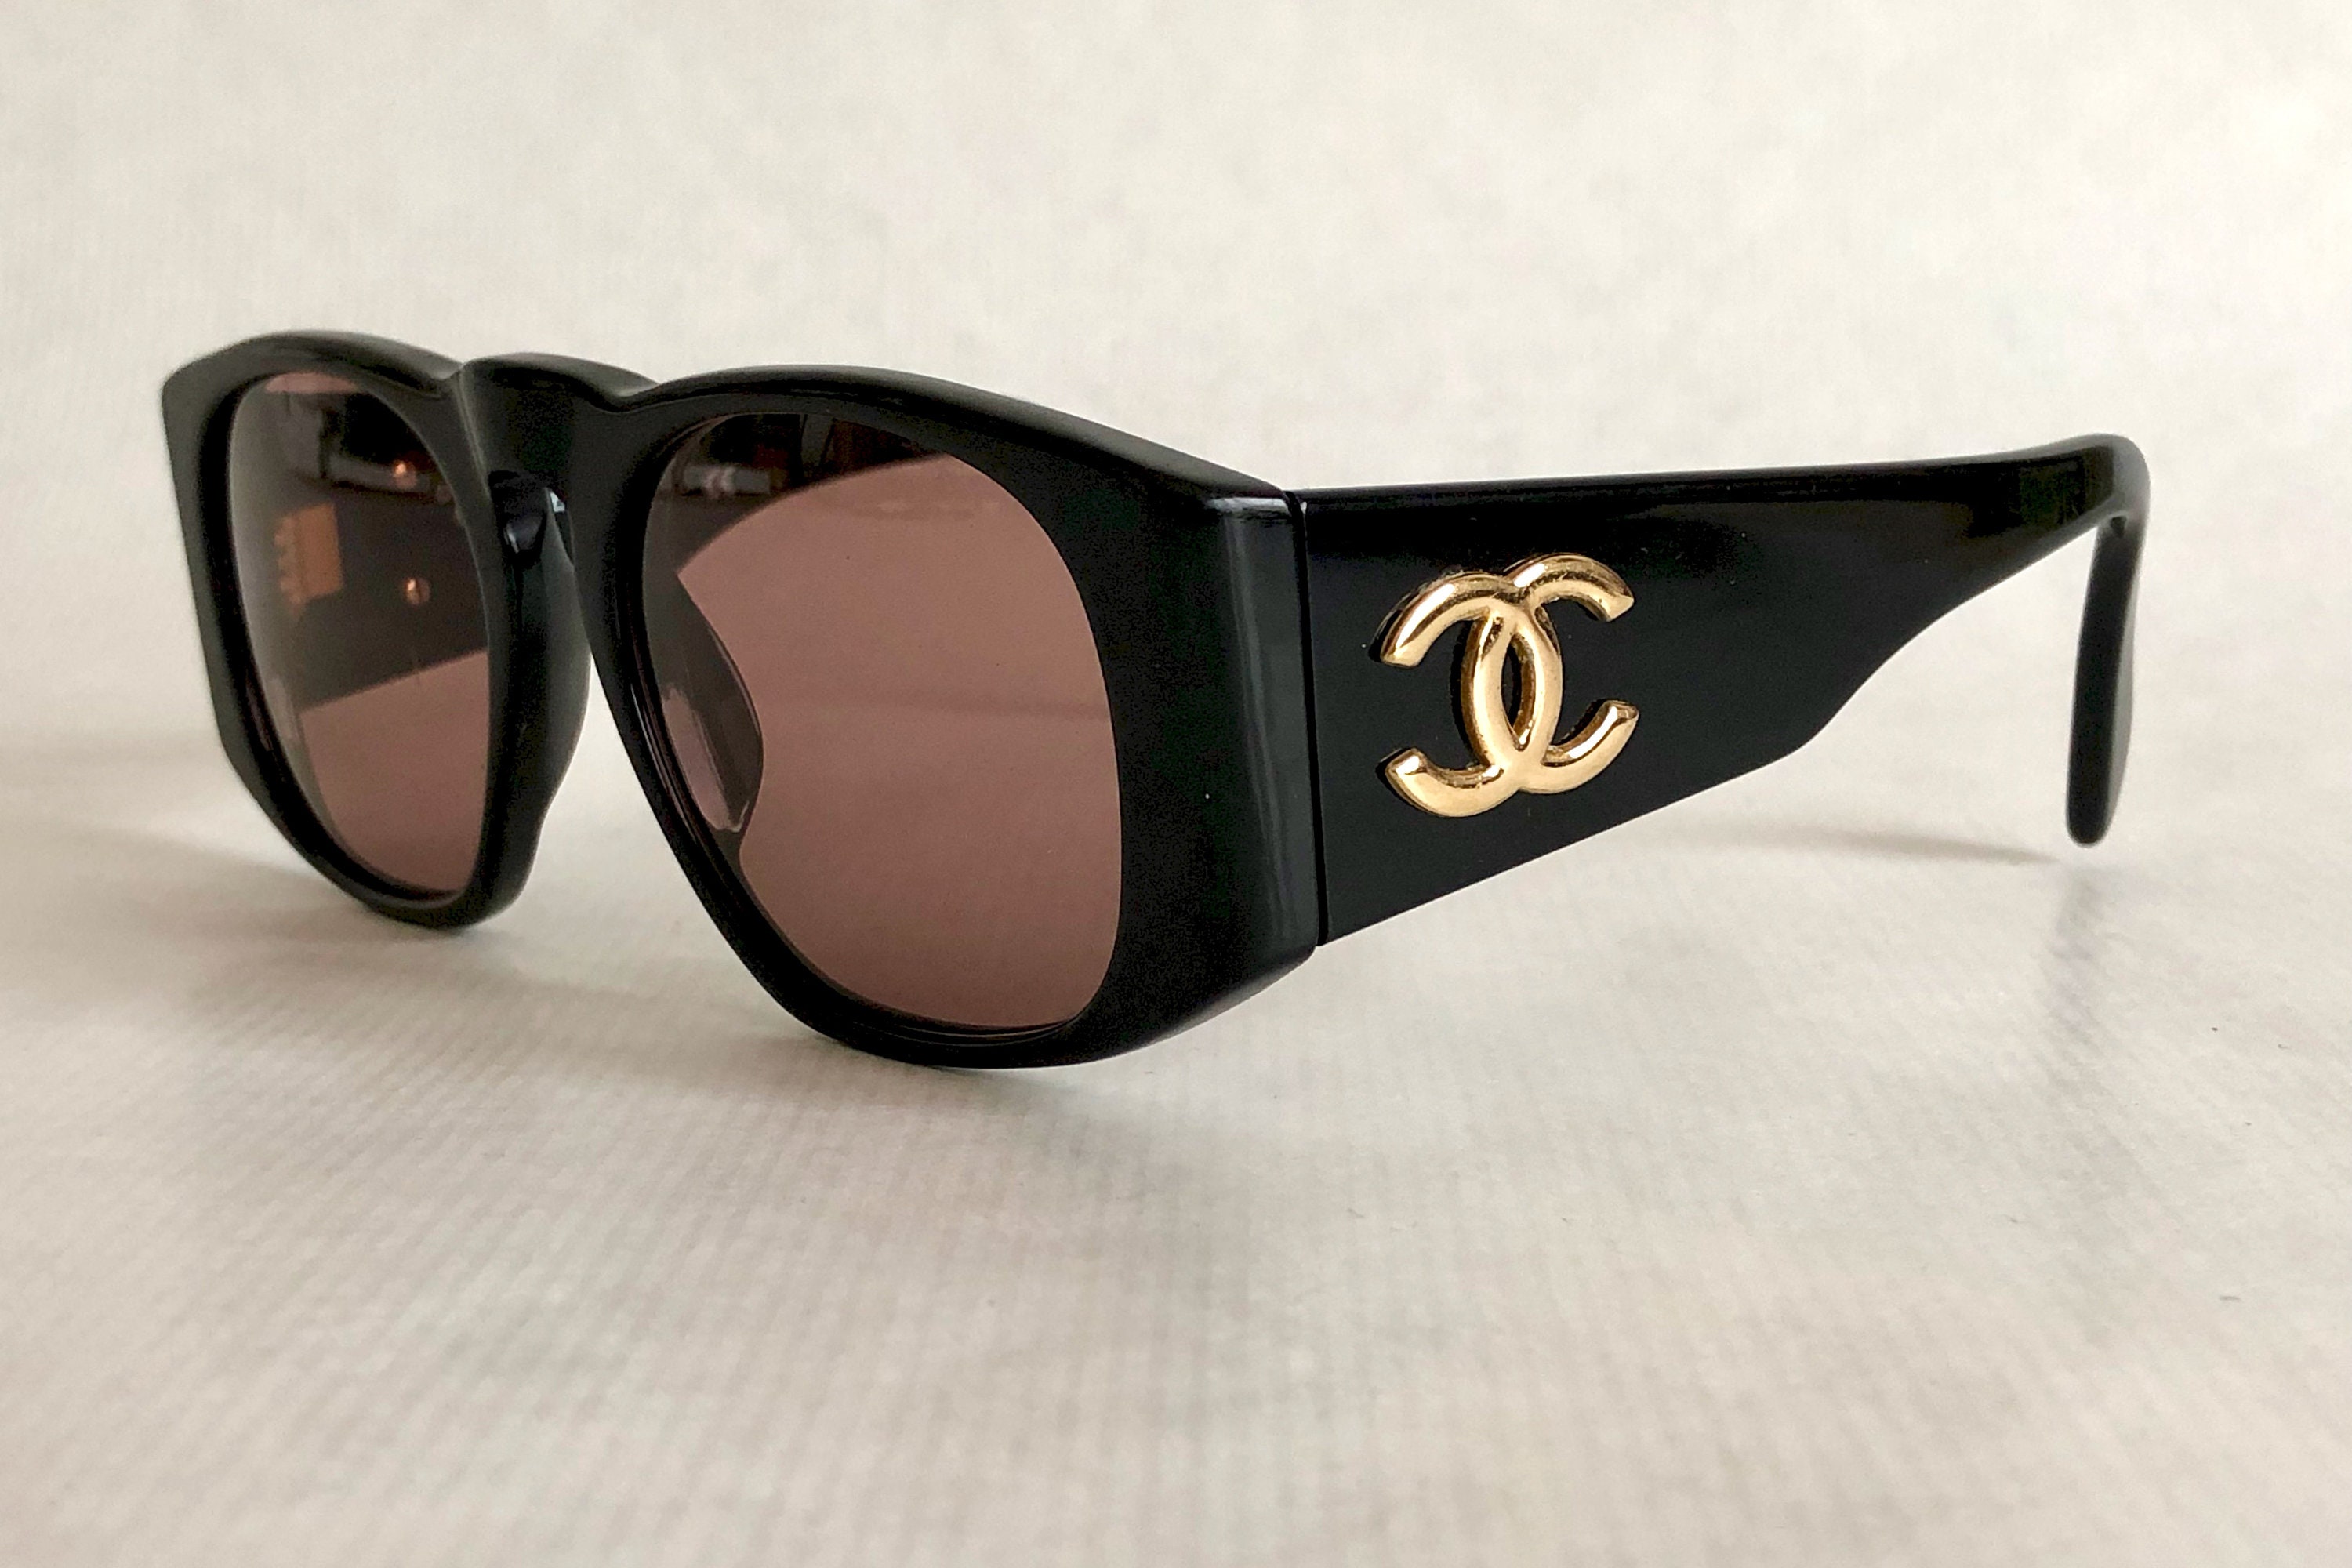 Reserved for Drew /// CHANEL 01451 94305 Vintage Sunglasses – New Old ...